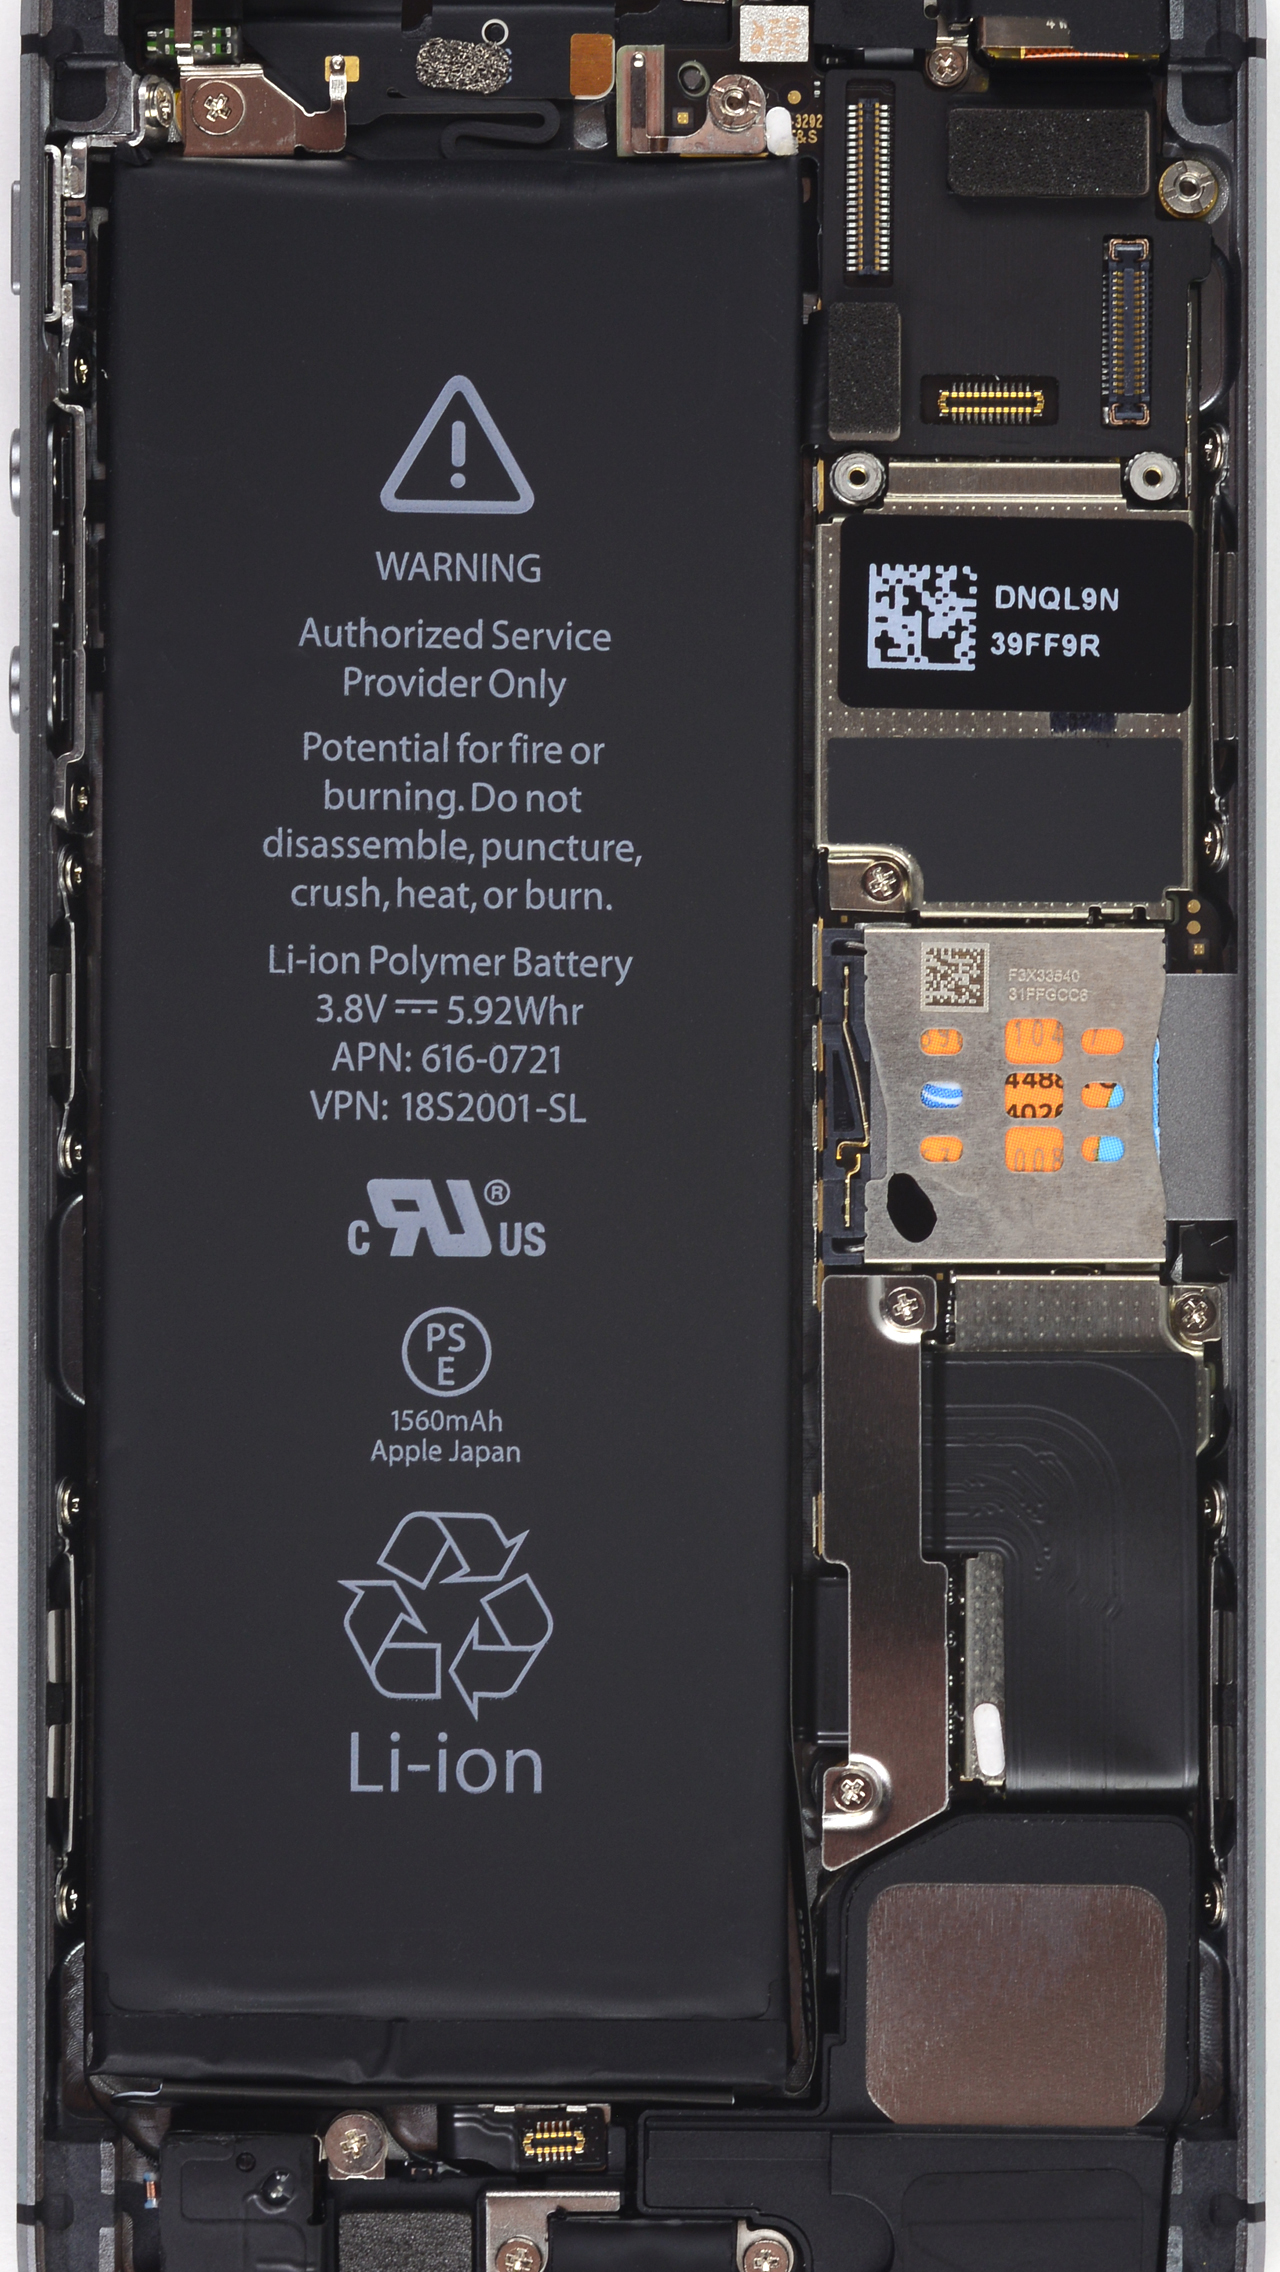 iPhone 5sc and iMac Internals Wallpapers iFixit